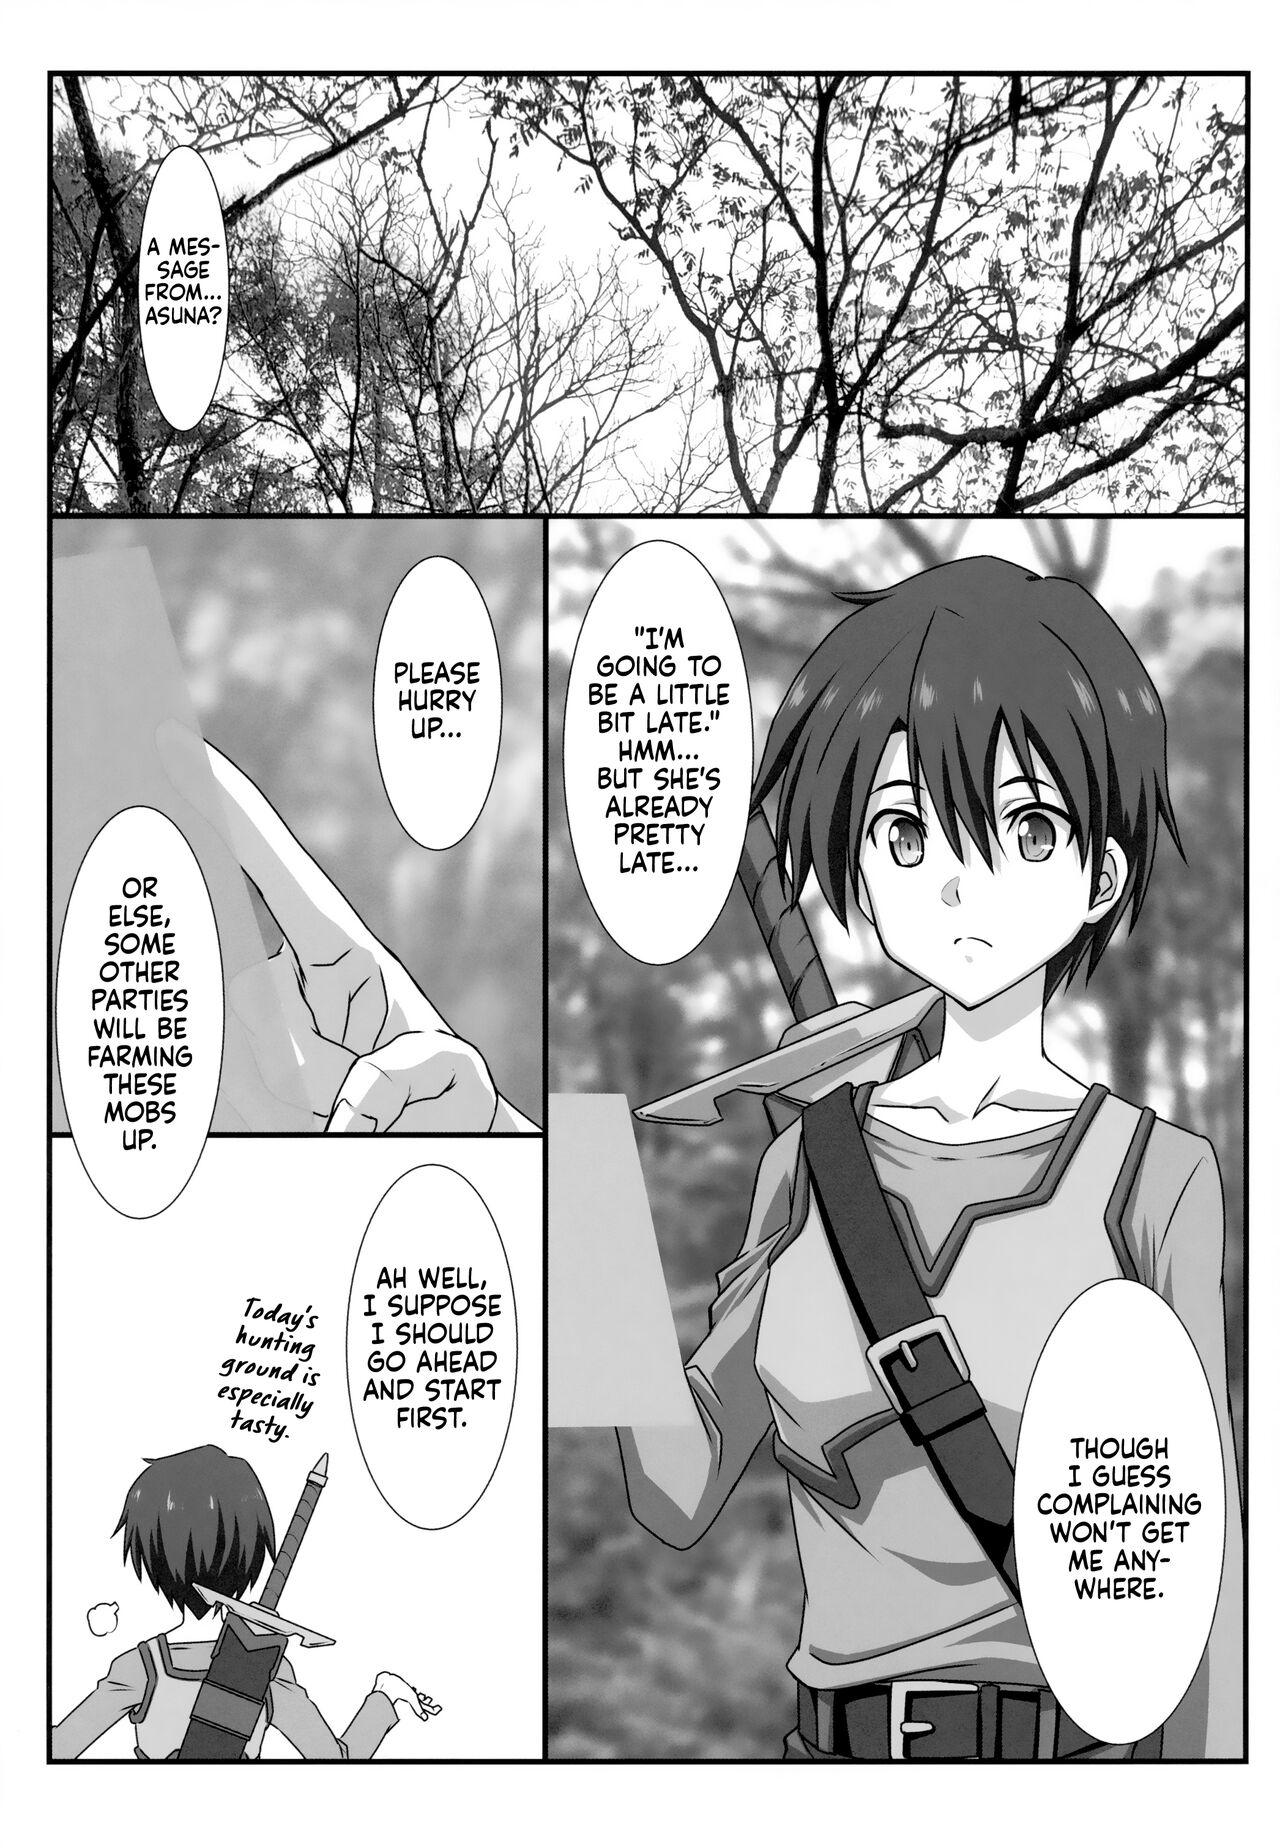 Slutty Astral Bout Ver. 47 - Sword art online First - Page 4